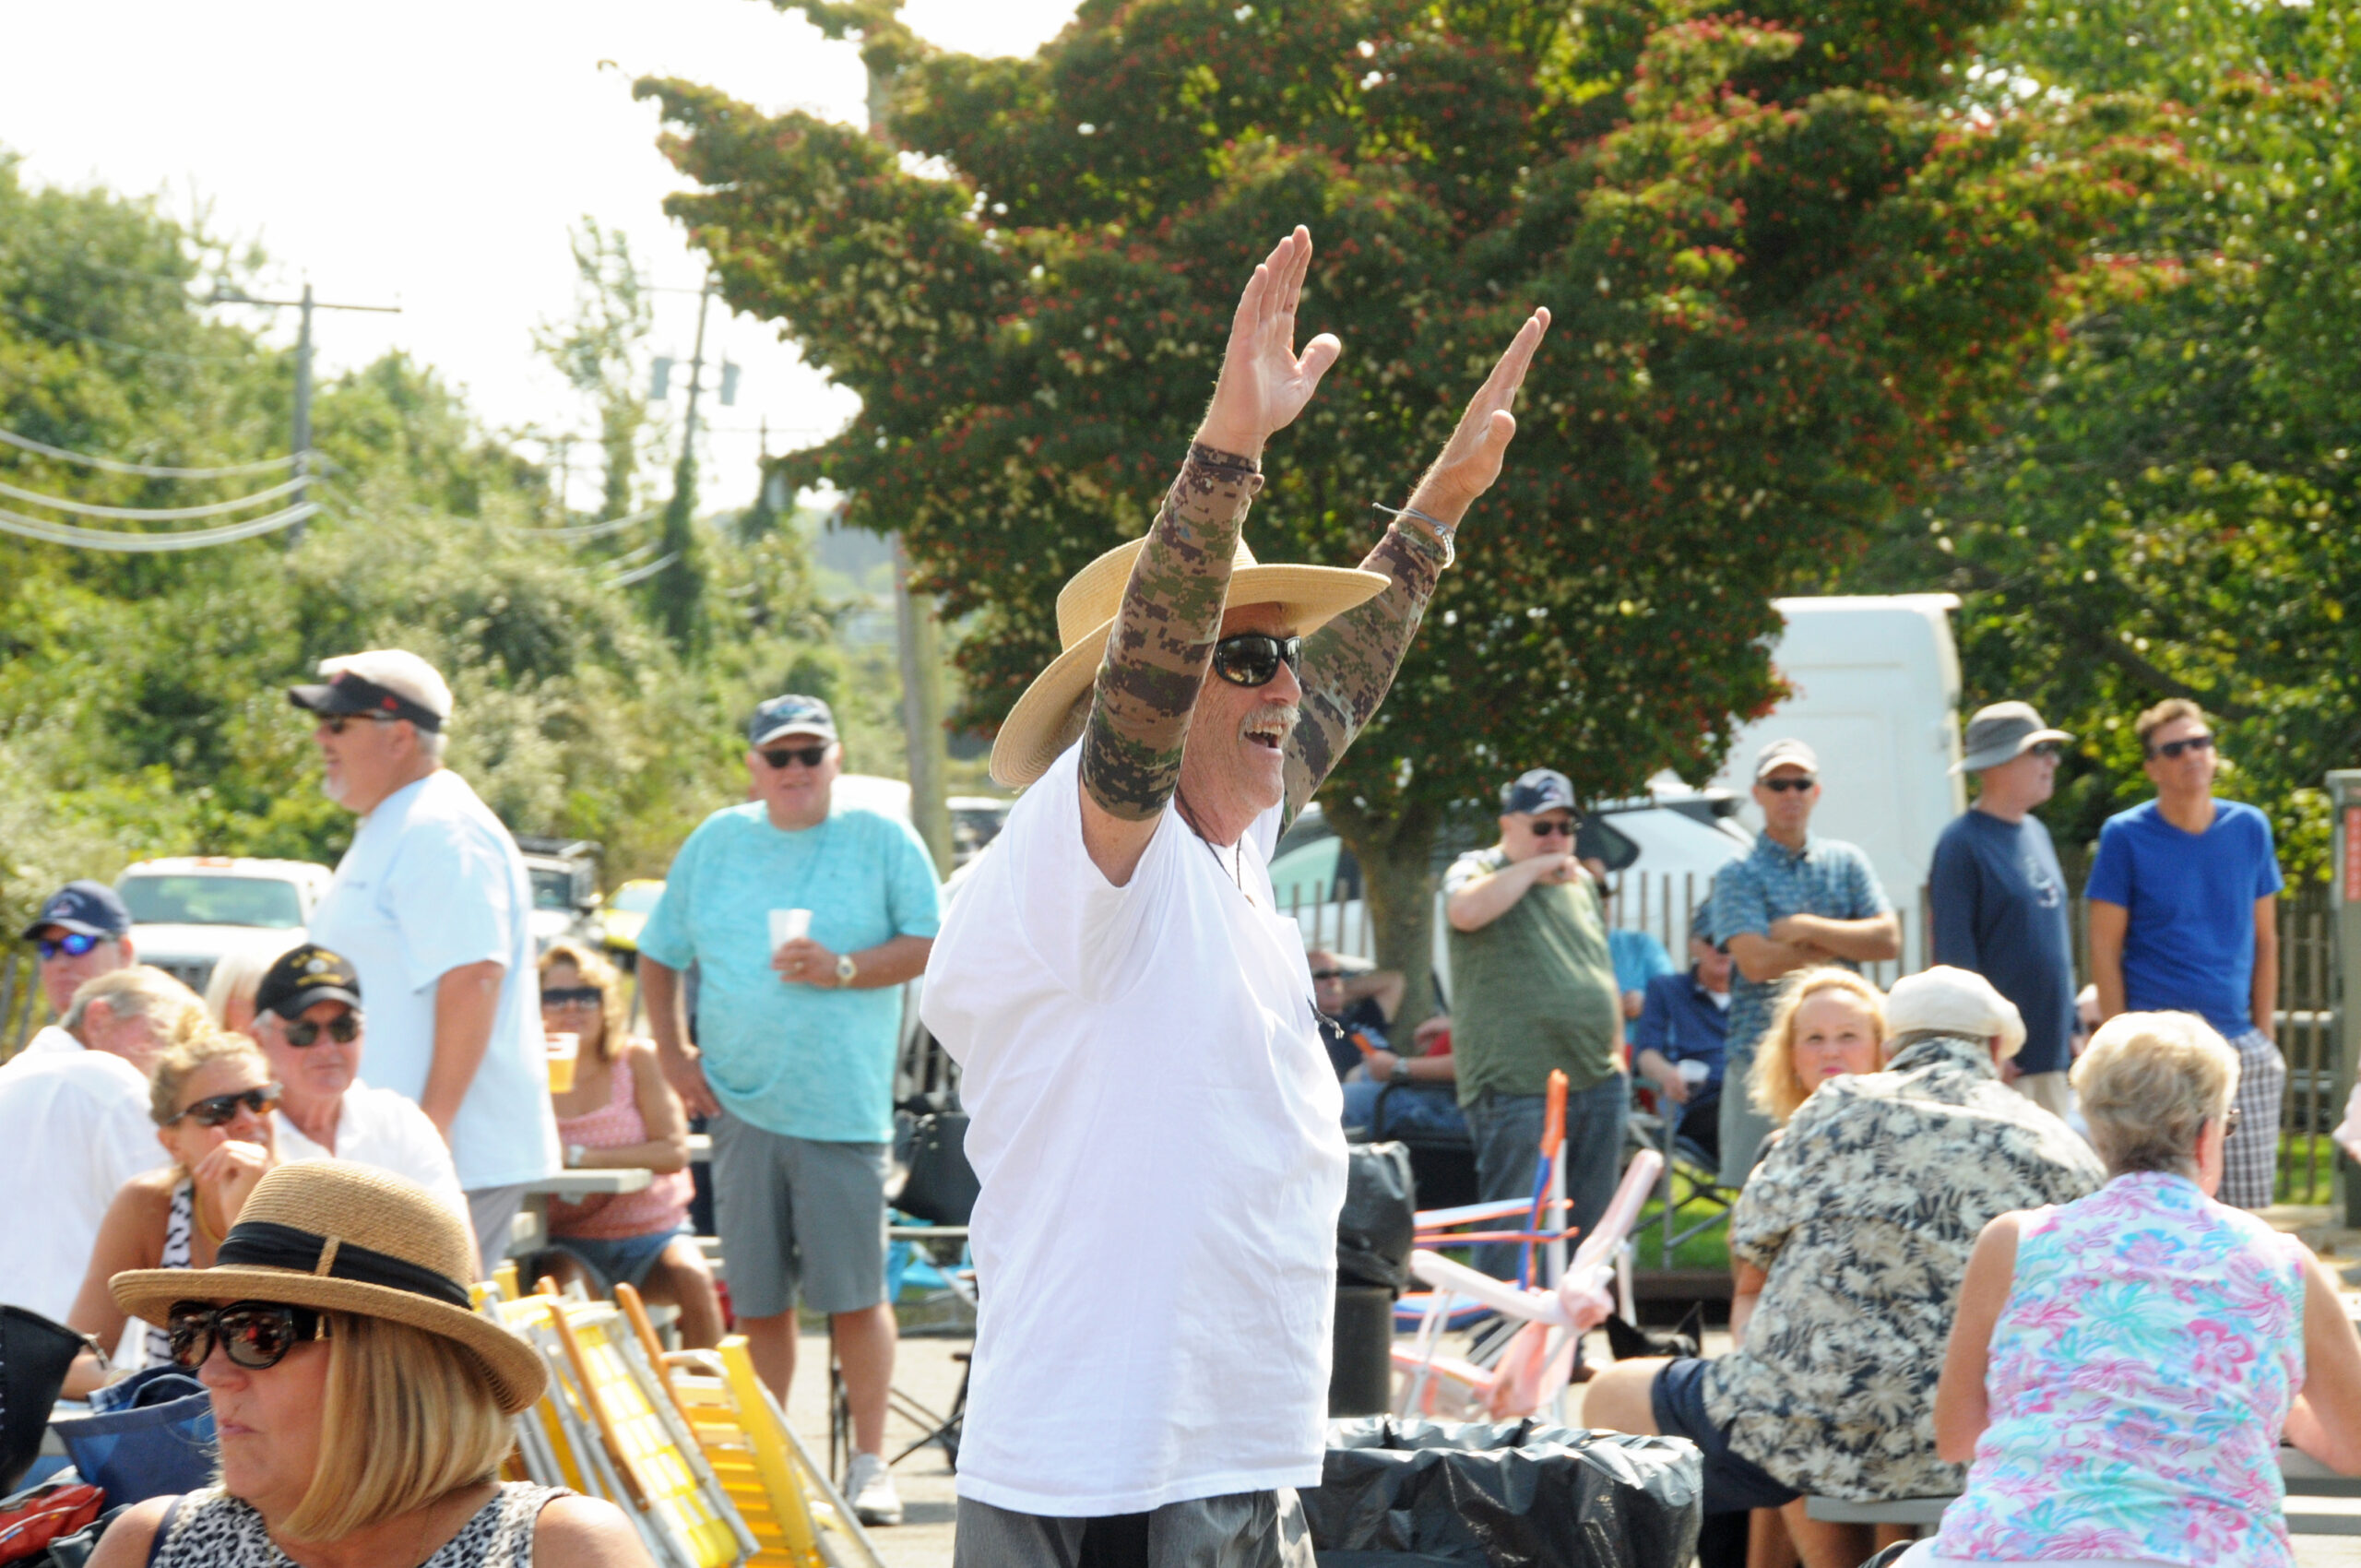 John Gale celebrates as his is the first ticket drawn from the drum at the Montauk Fire Department's Big Bucks Bonanza on Sunday. Since 1983, the Montauk Fire Department's Big Bucks Bonanza has given away 1,641 prizes totaling $4,955,500.00 in prize money.  Proceeds from the Bonanza go to a scholarship fund for Montauk youth.      RICHARD LEWIN